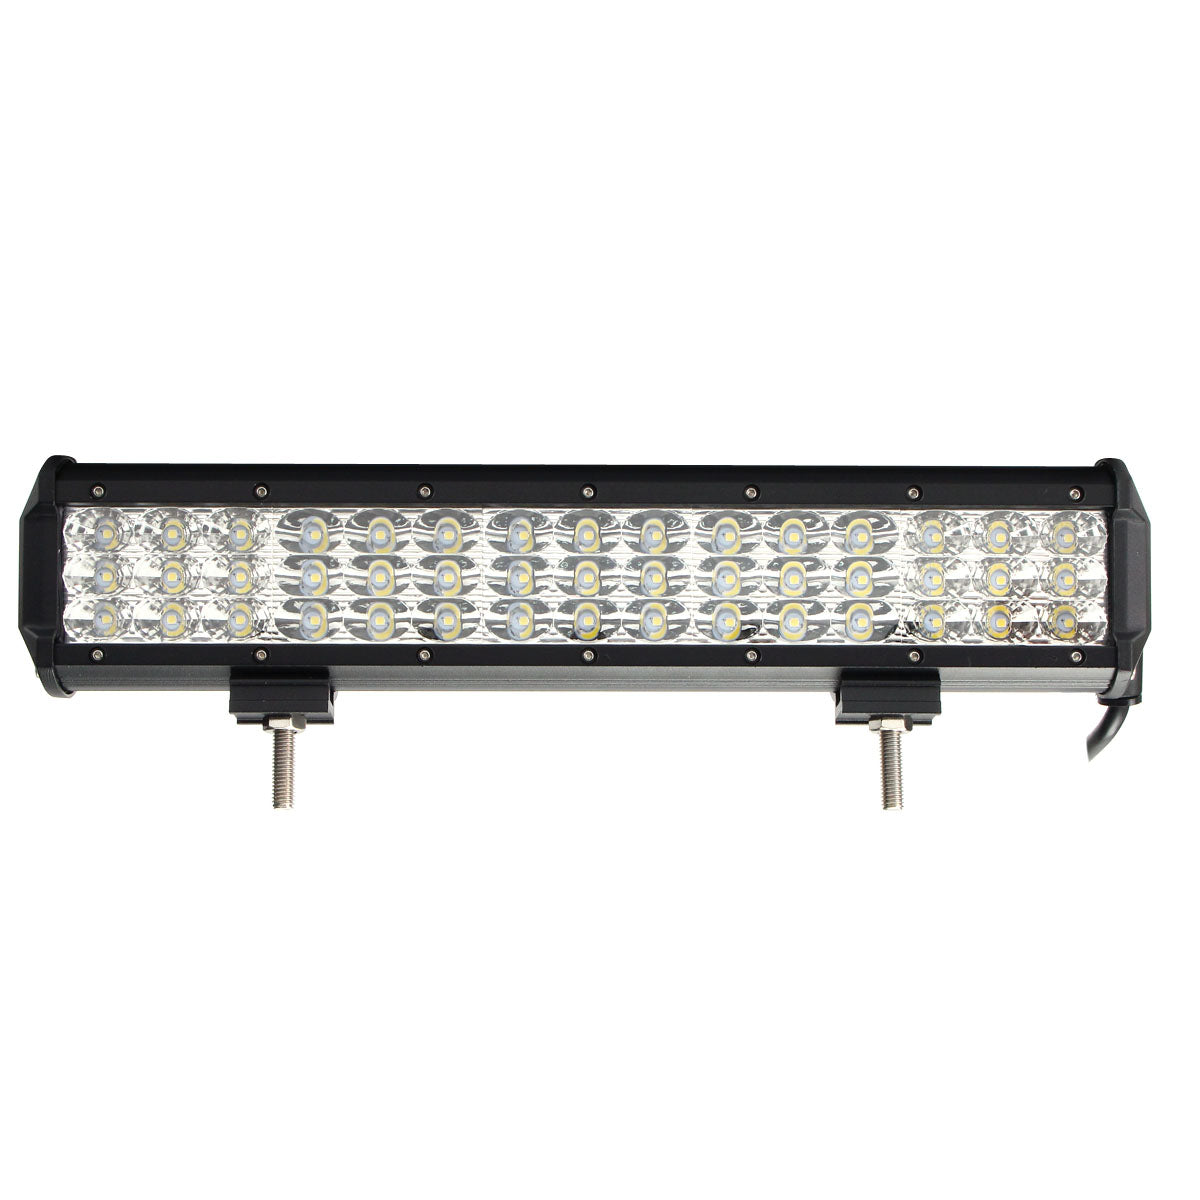 Gray 14Inch LED Work Light Bar Tri Row Flood Spot Combo Beam DC10-30V 135W for JEEP Off Road SUV